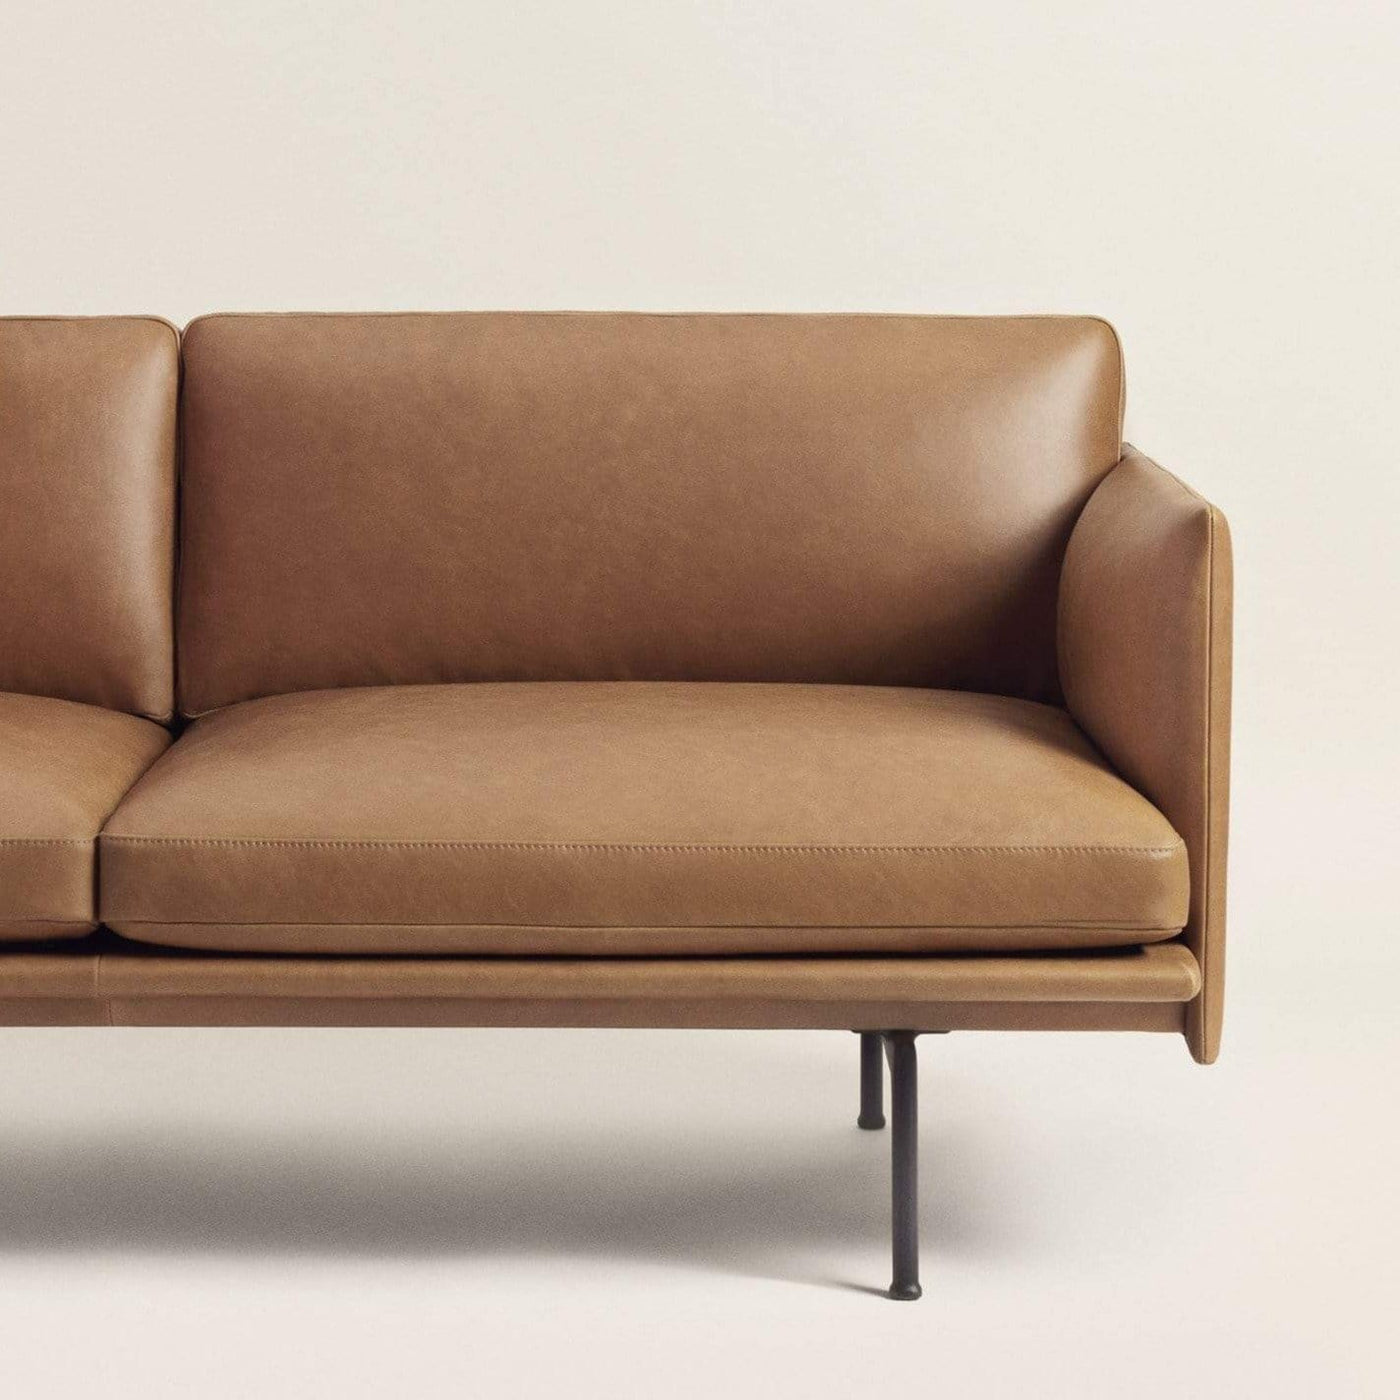 Muuto Outline Sofa in Cognac Refine Leather. Made to order from someday designs